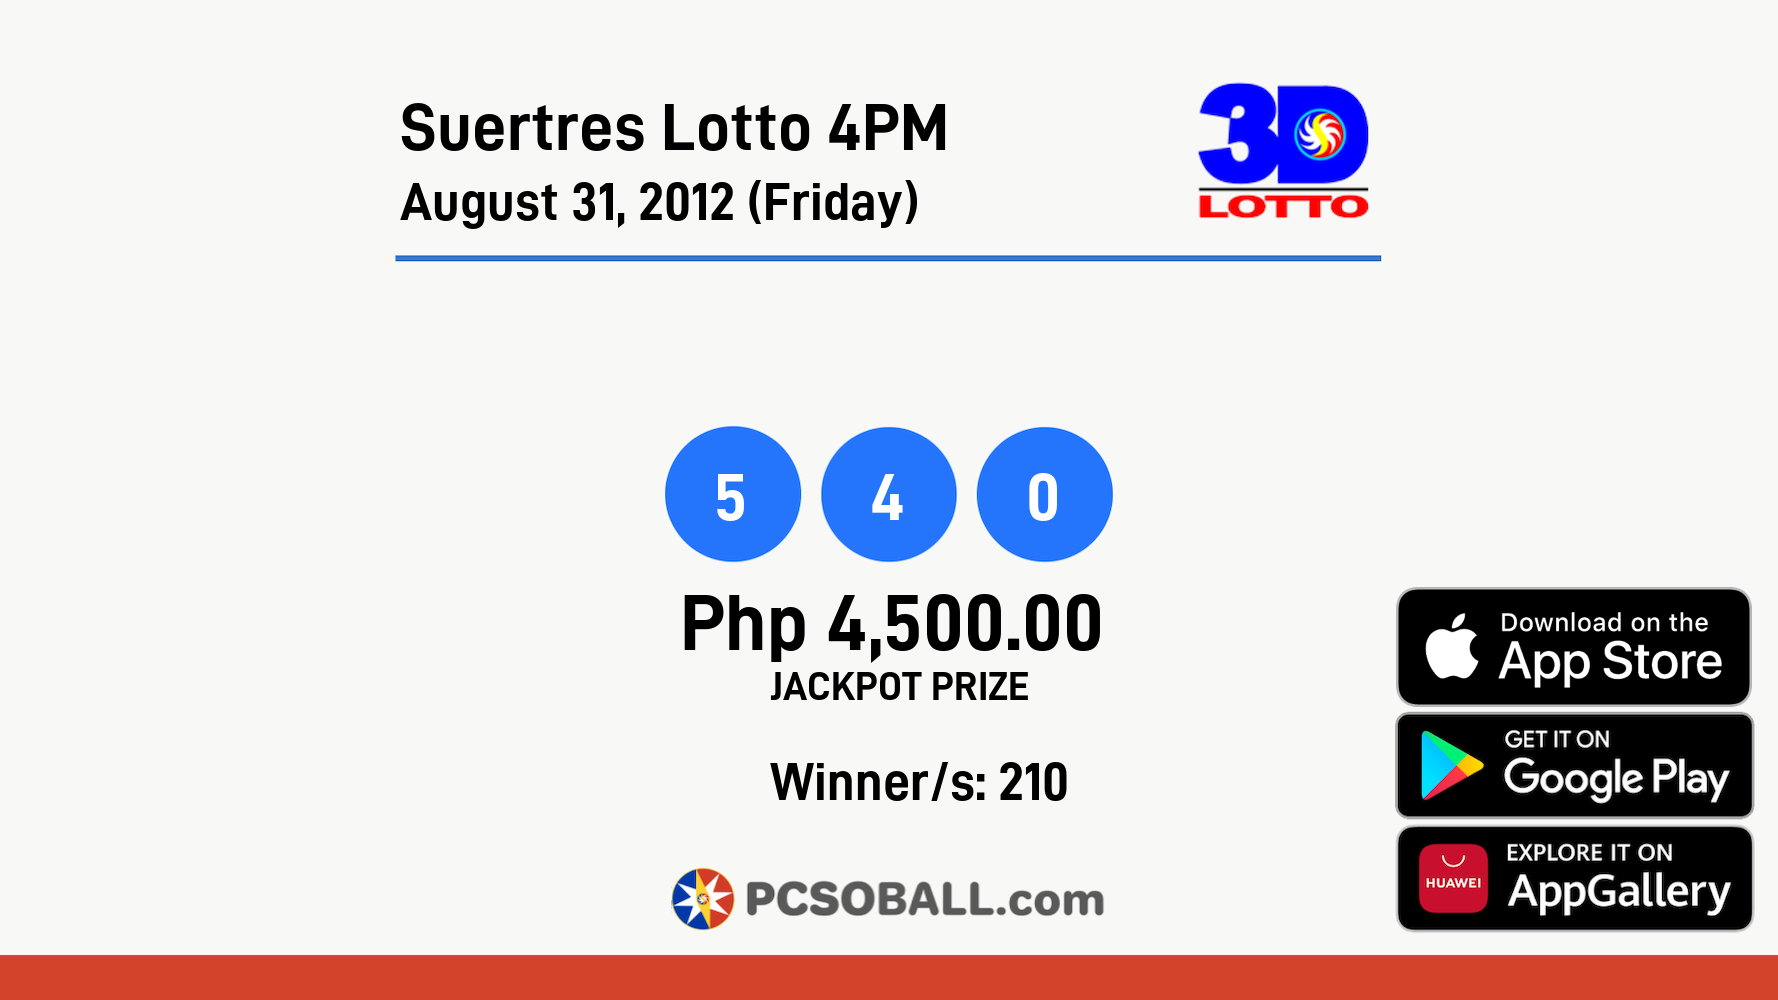 Suertres Lotto 4PM August 31, 2012 (Friday) Result